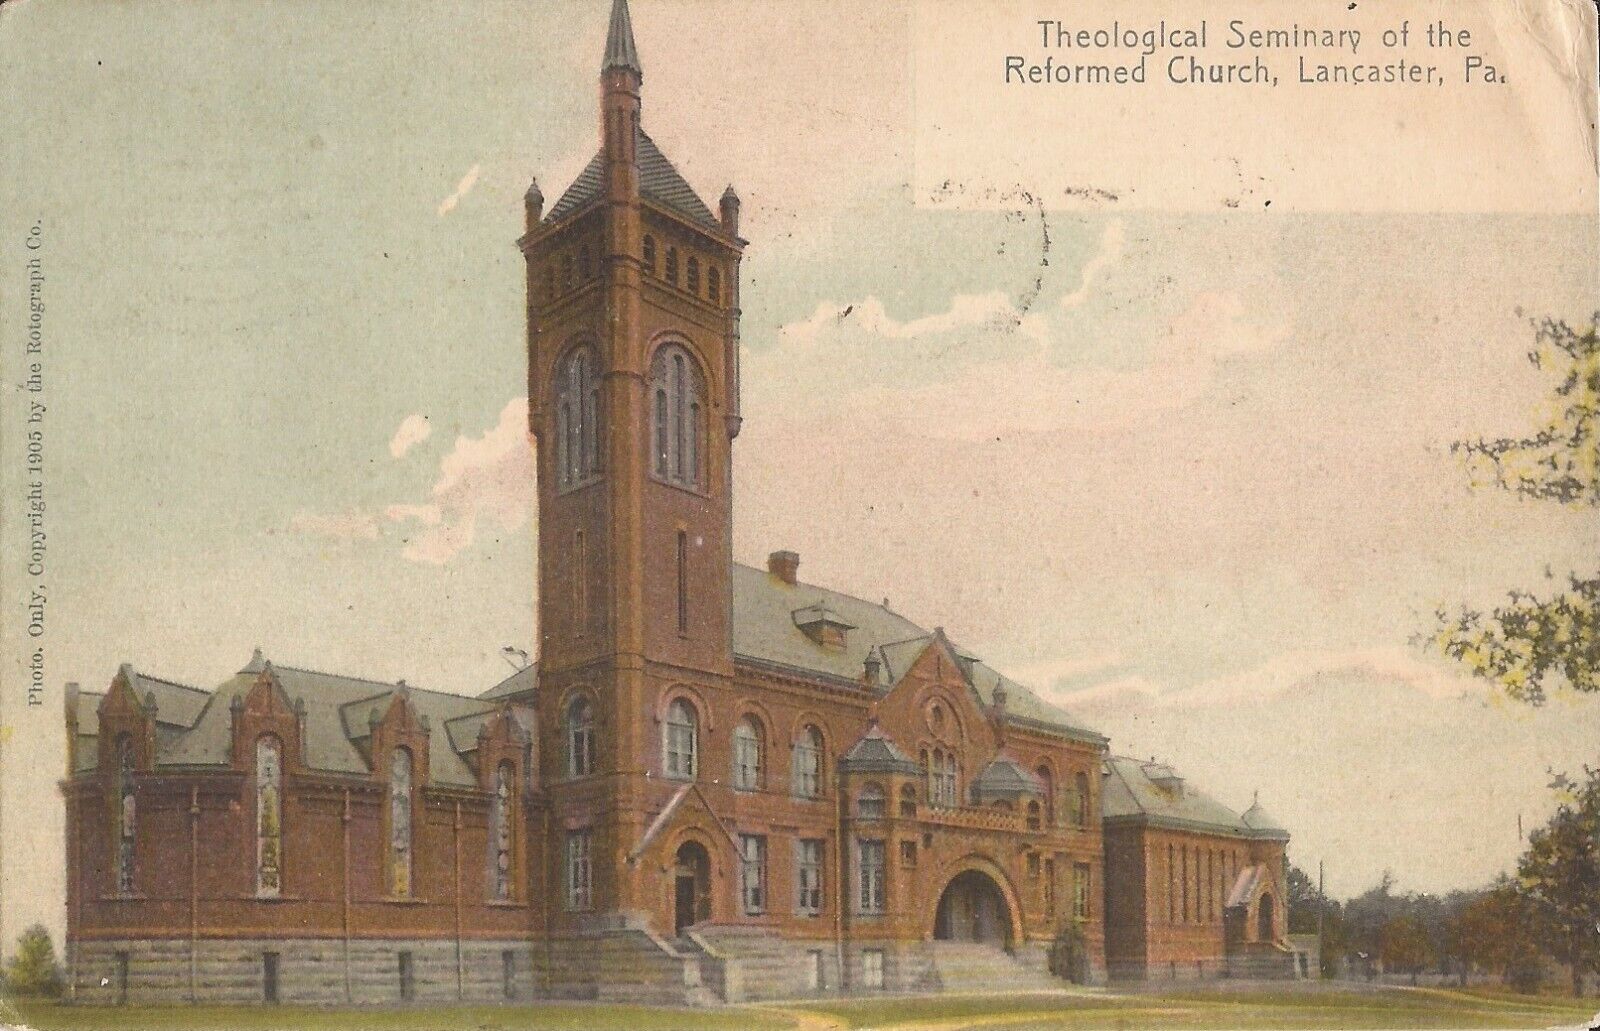 Lancaster, PENNSYLVANIA - Theological Seminary of the Reformed Church - 1911